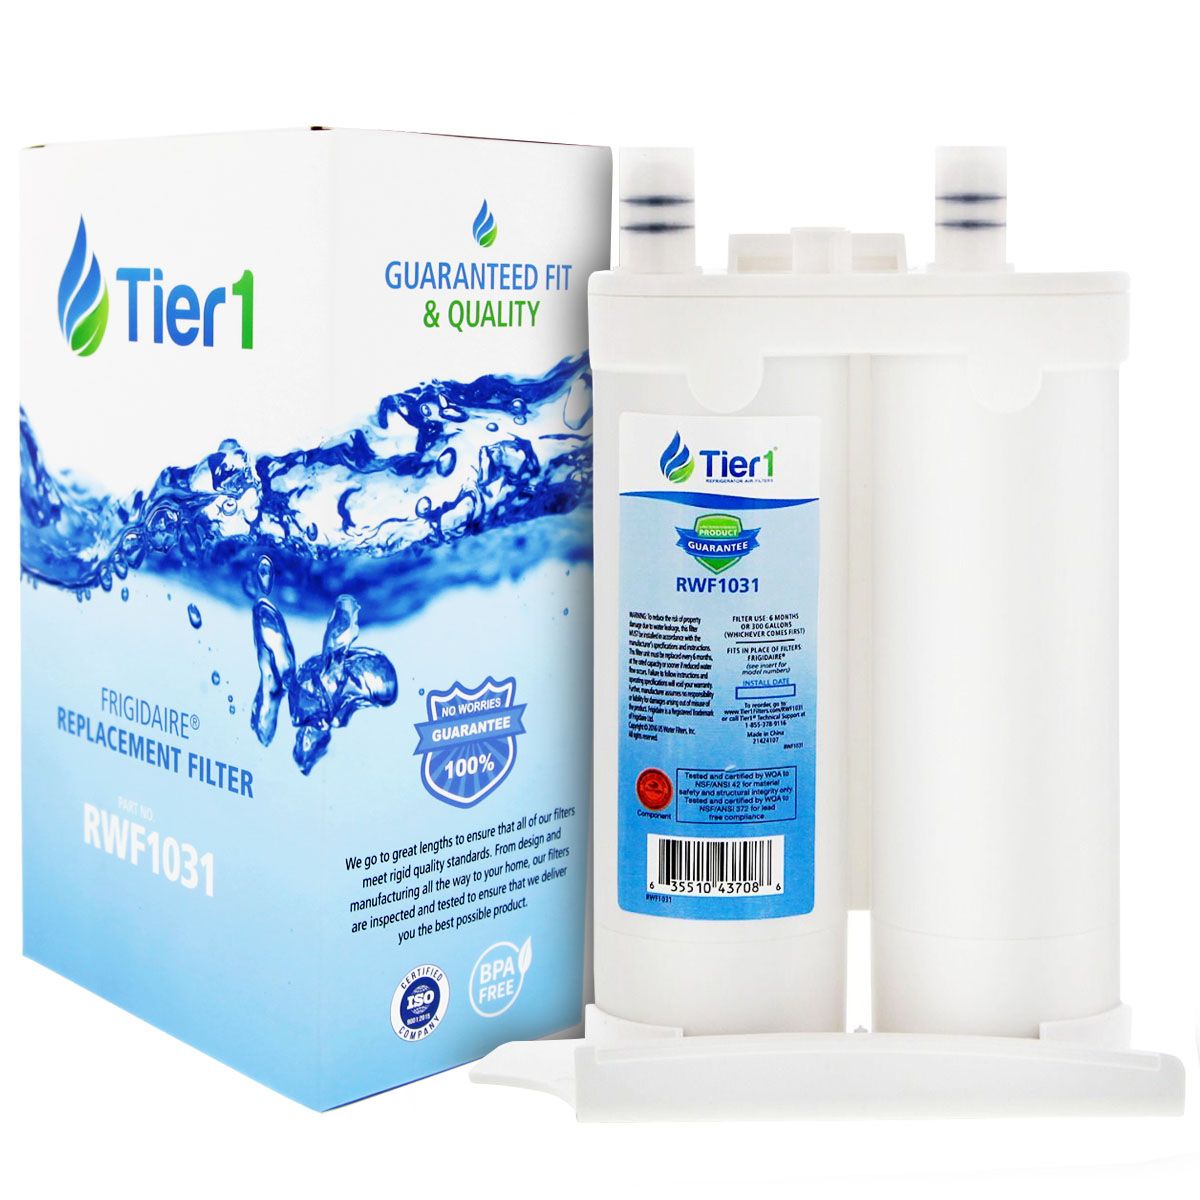 Tier1 Frigidaire WF2CB PureSource2 Refrigerator Water Filter Replacement Comparable